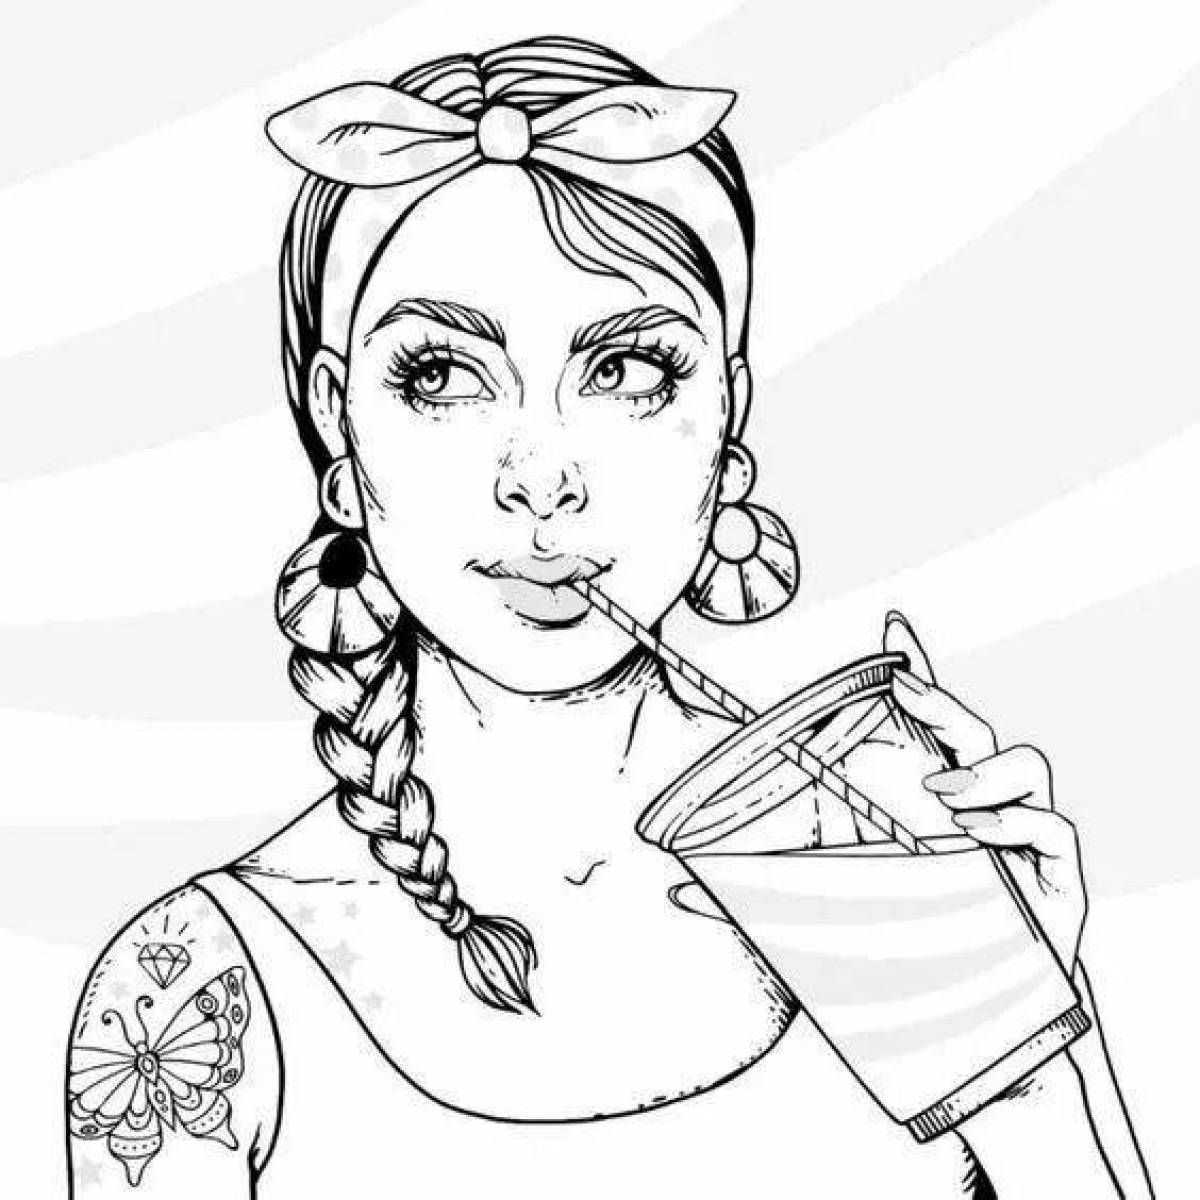 Witty pin-up coloring book